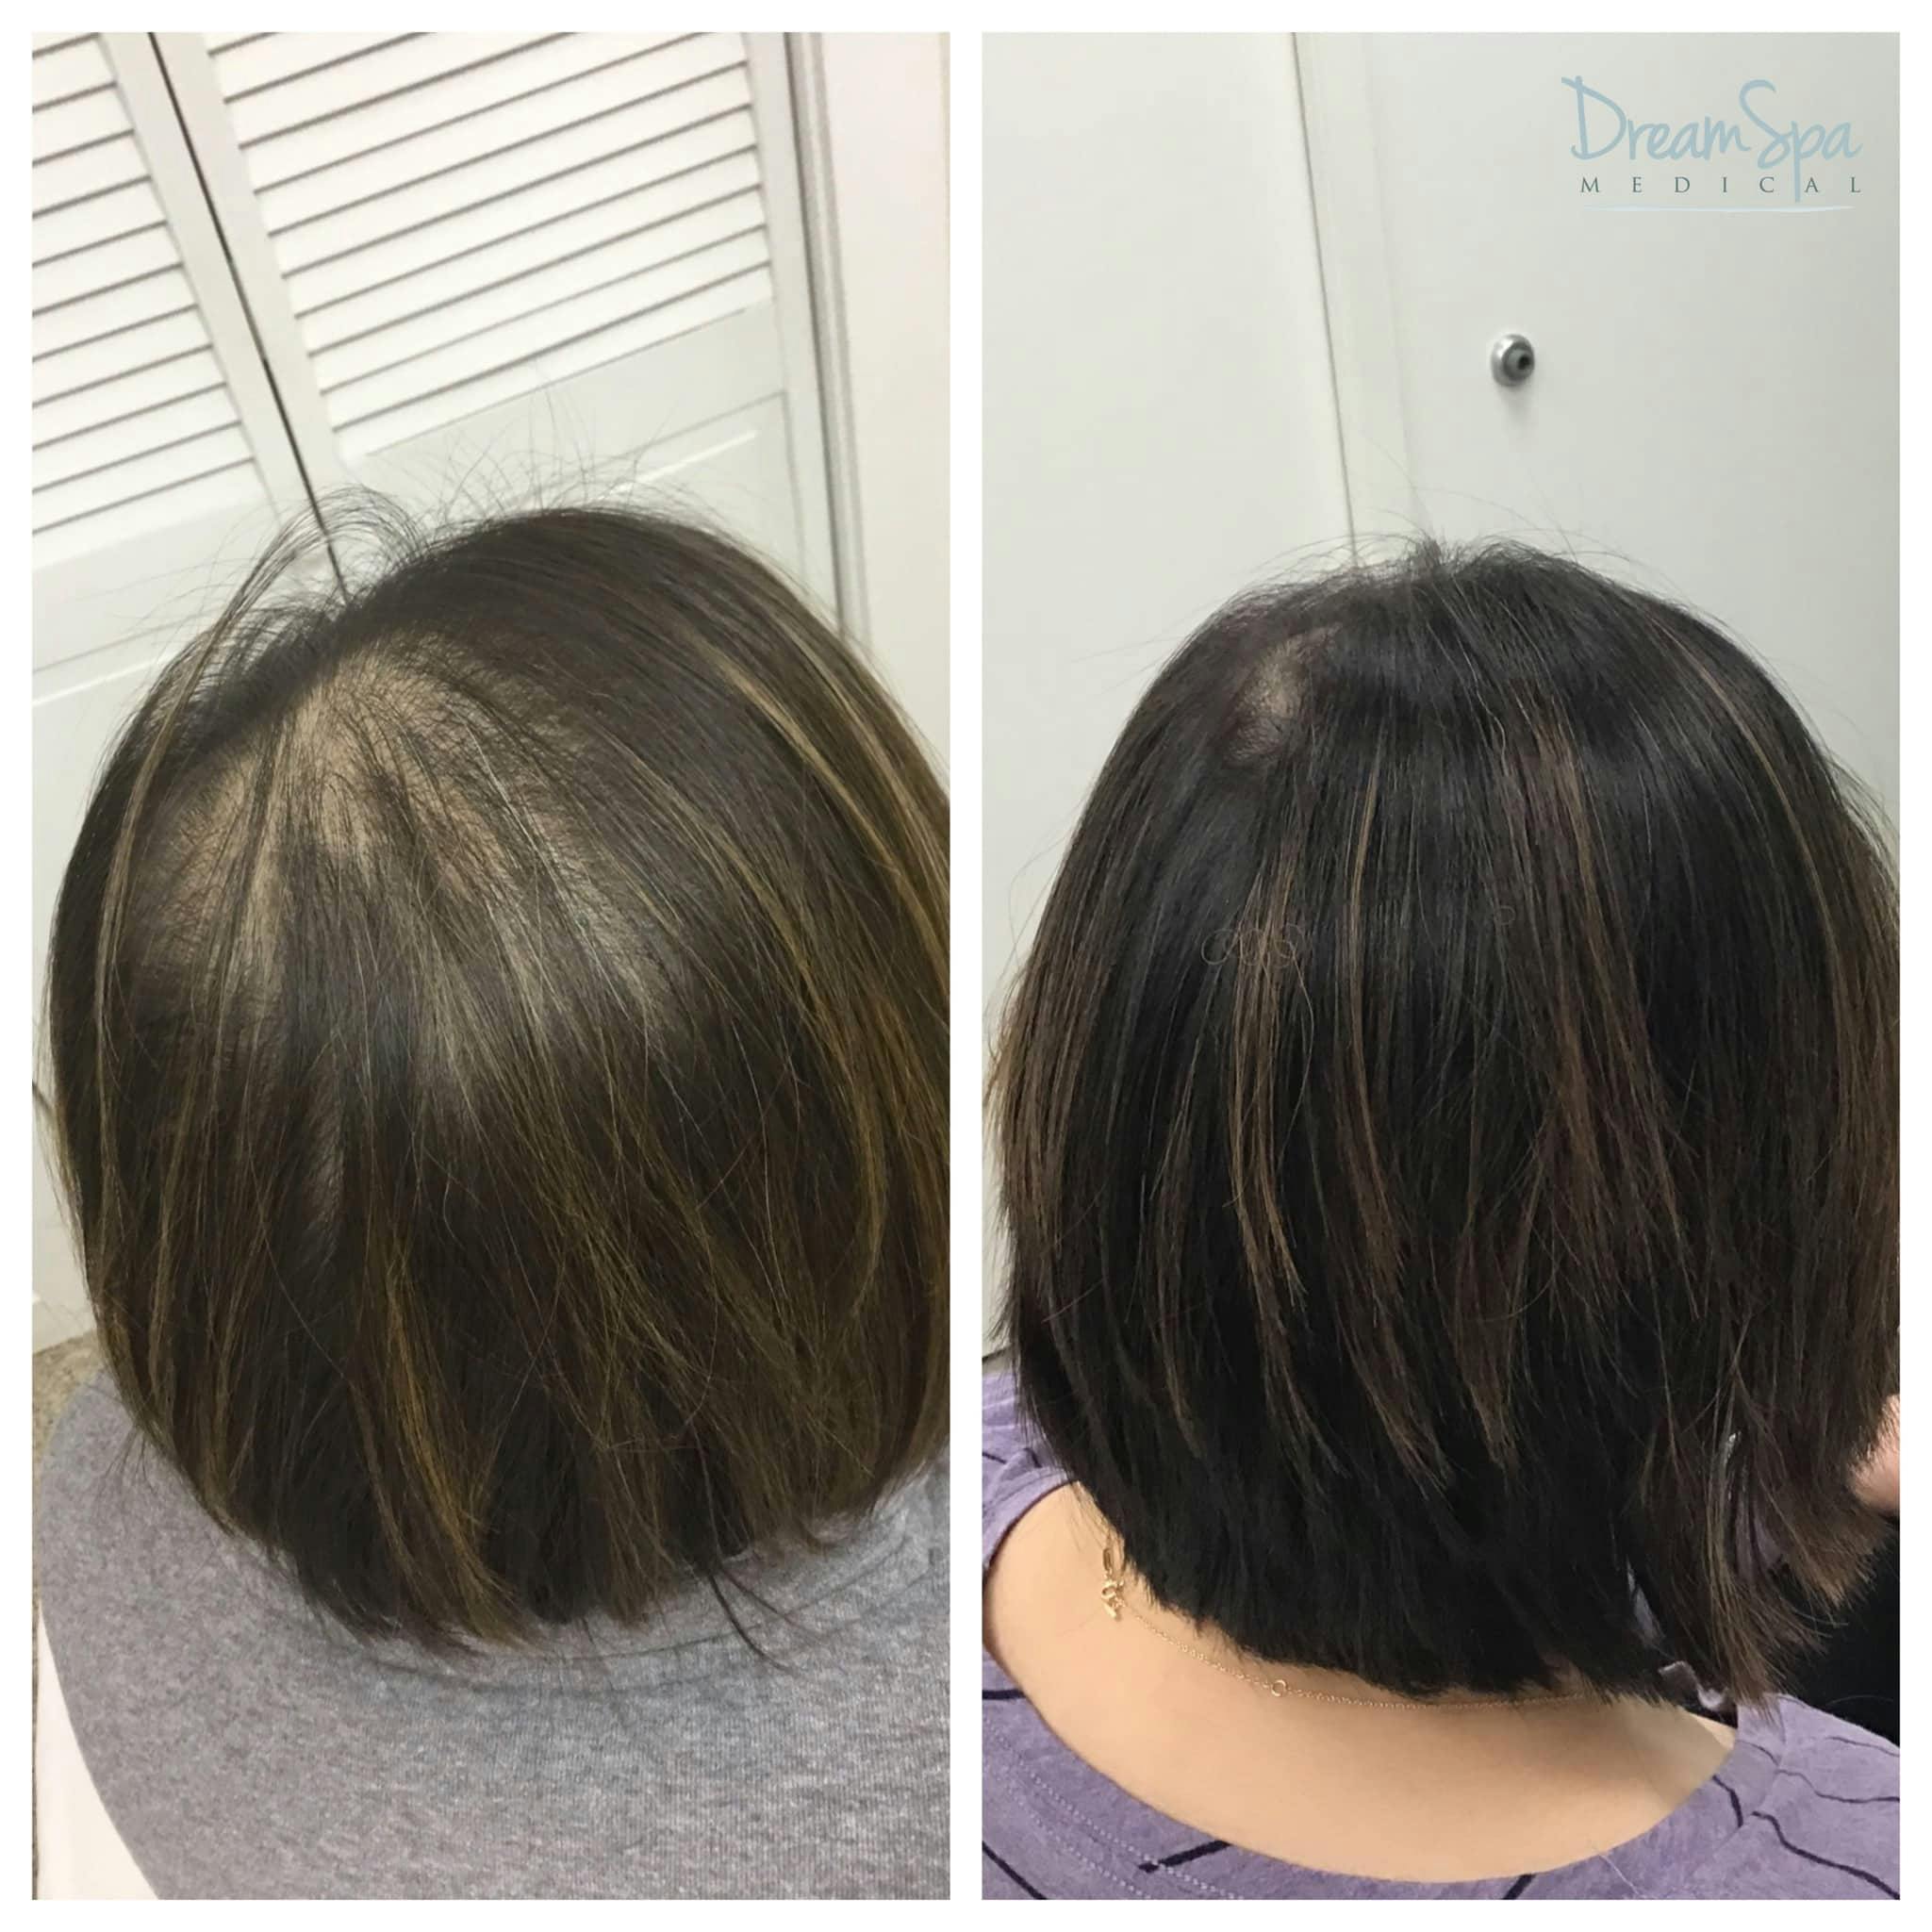 Hair Restoration Before & After